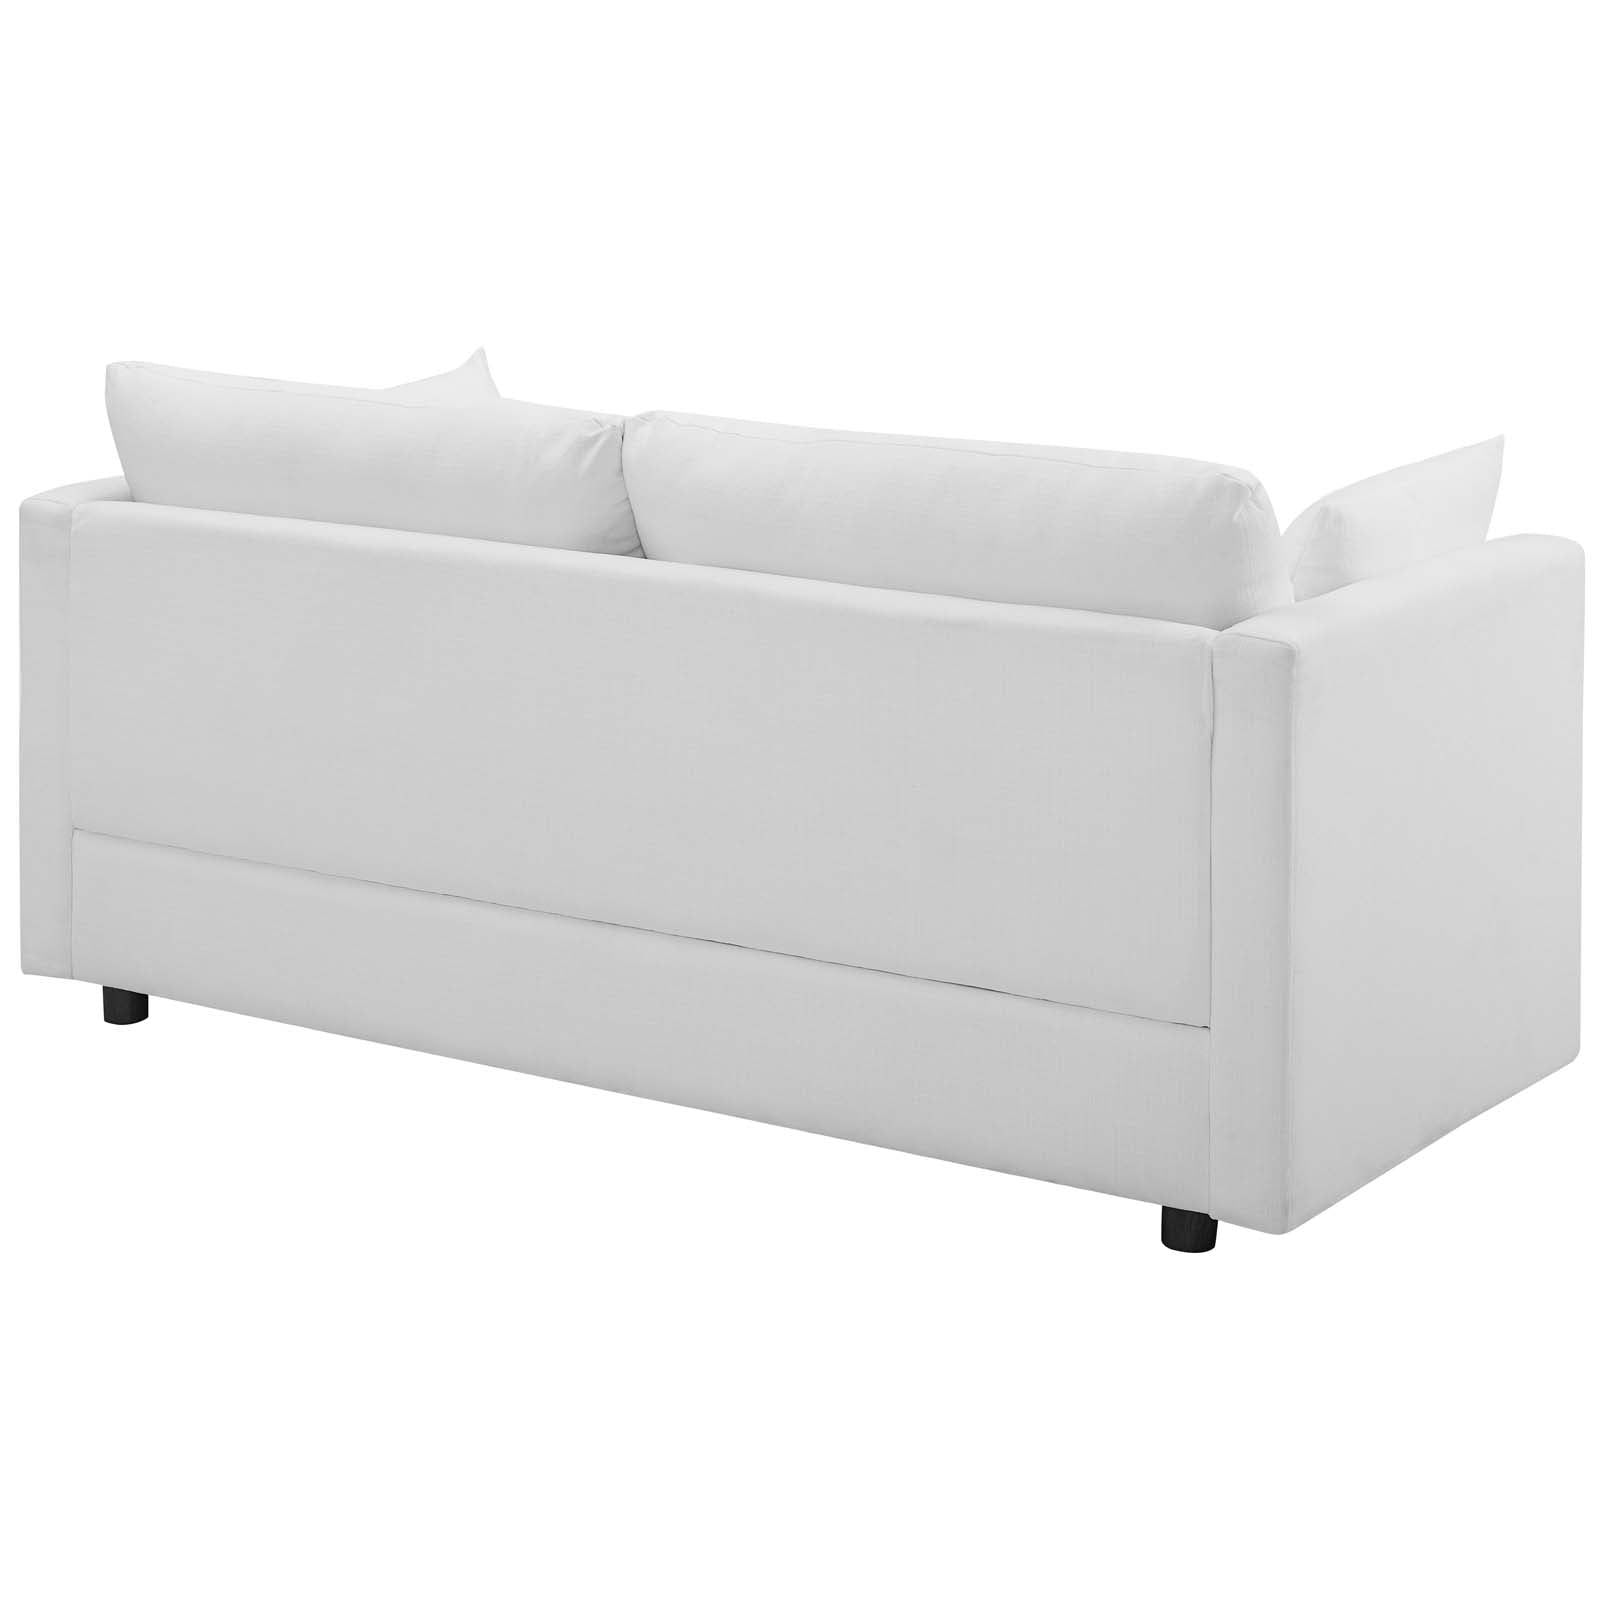 Modway Living Room Sets - Activate 3 Piece Upholstered Fabric Set White